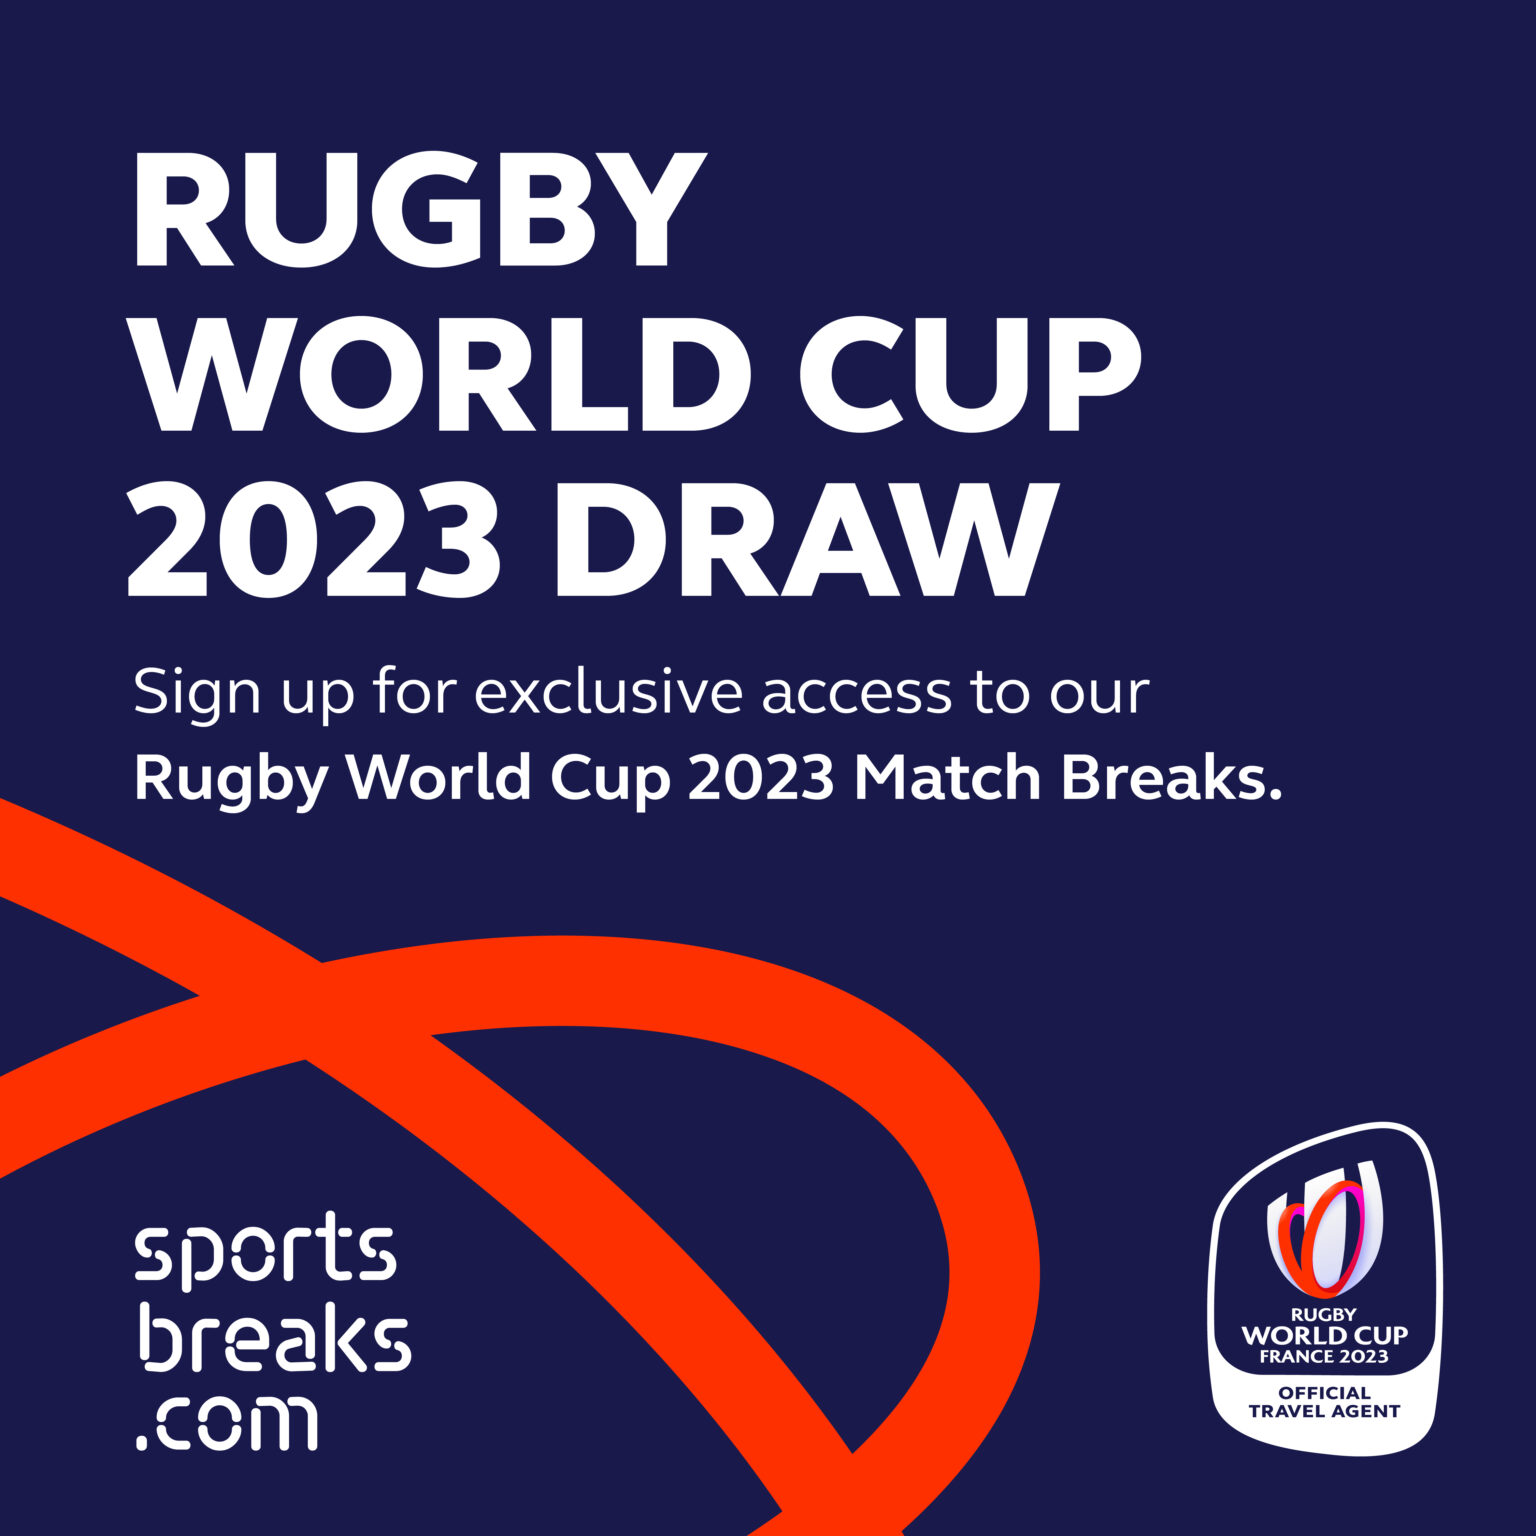 Sign up for early access to RWC 2023 Match Breaks | Ospreys Supporters Club